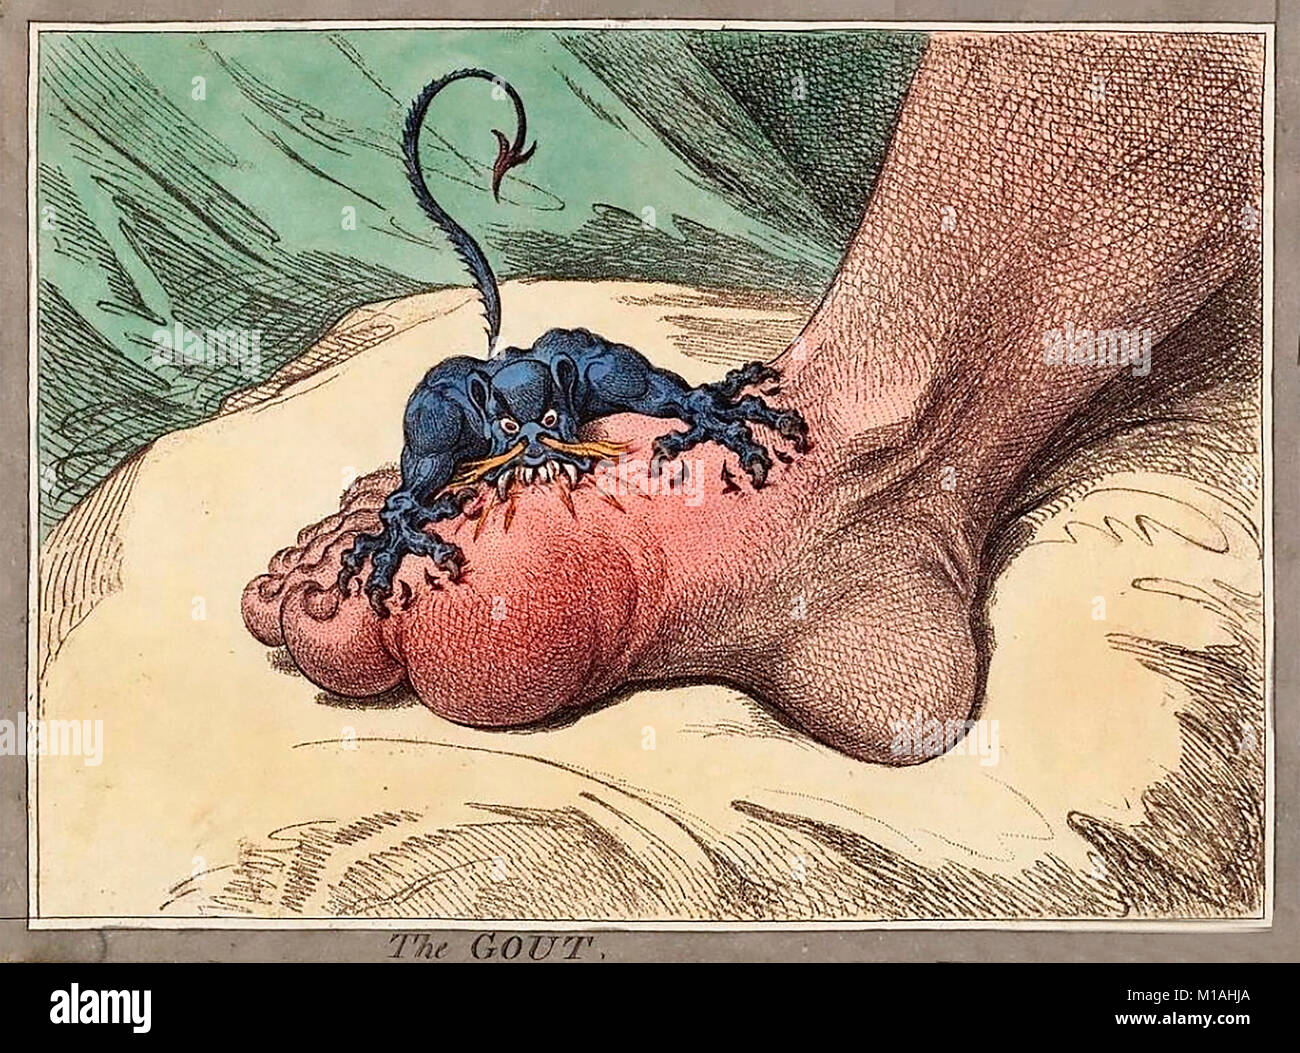 The Gout by James Gillray - Illustration showing the painful attack of gout Stock Photo